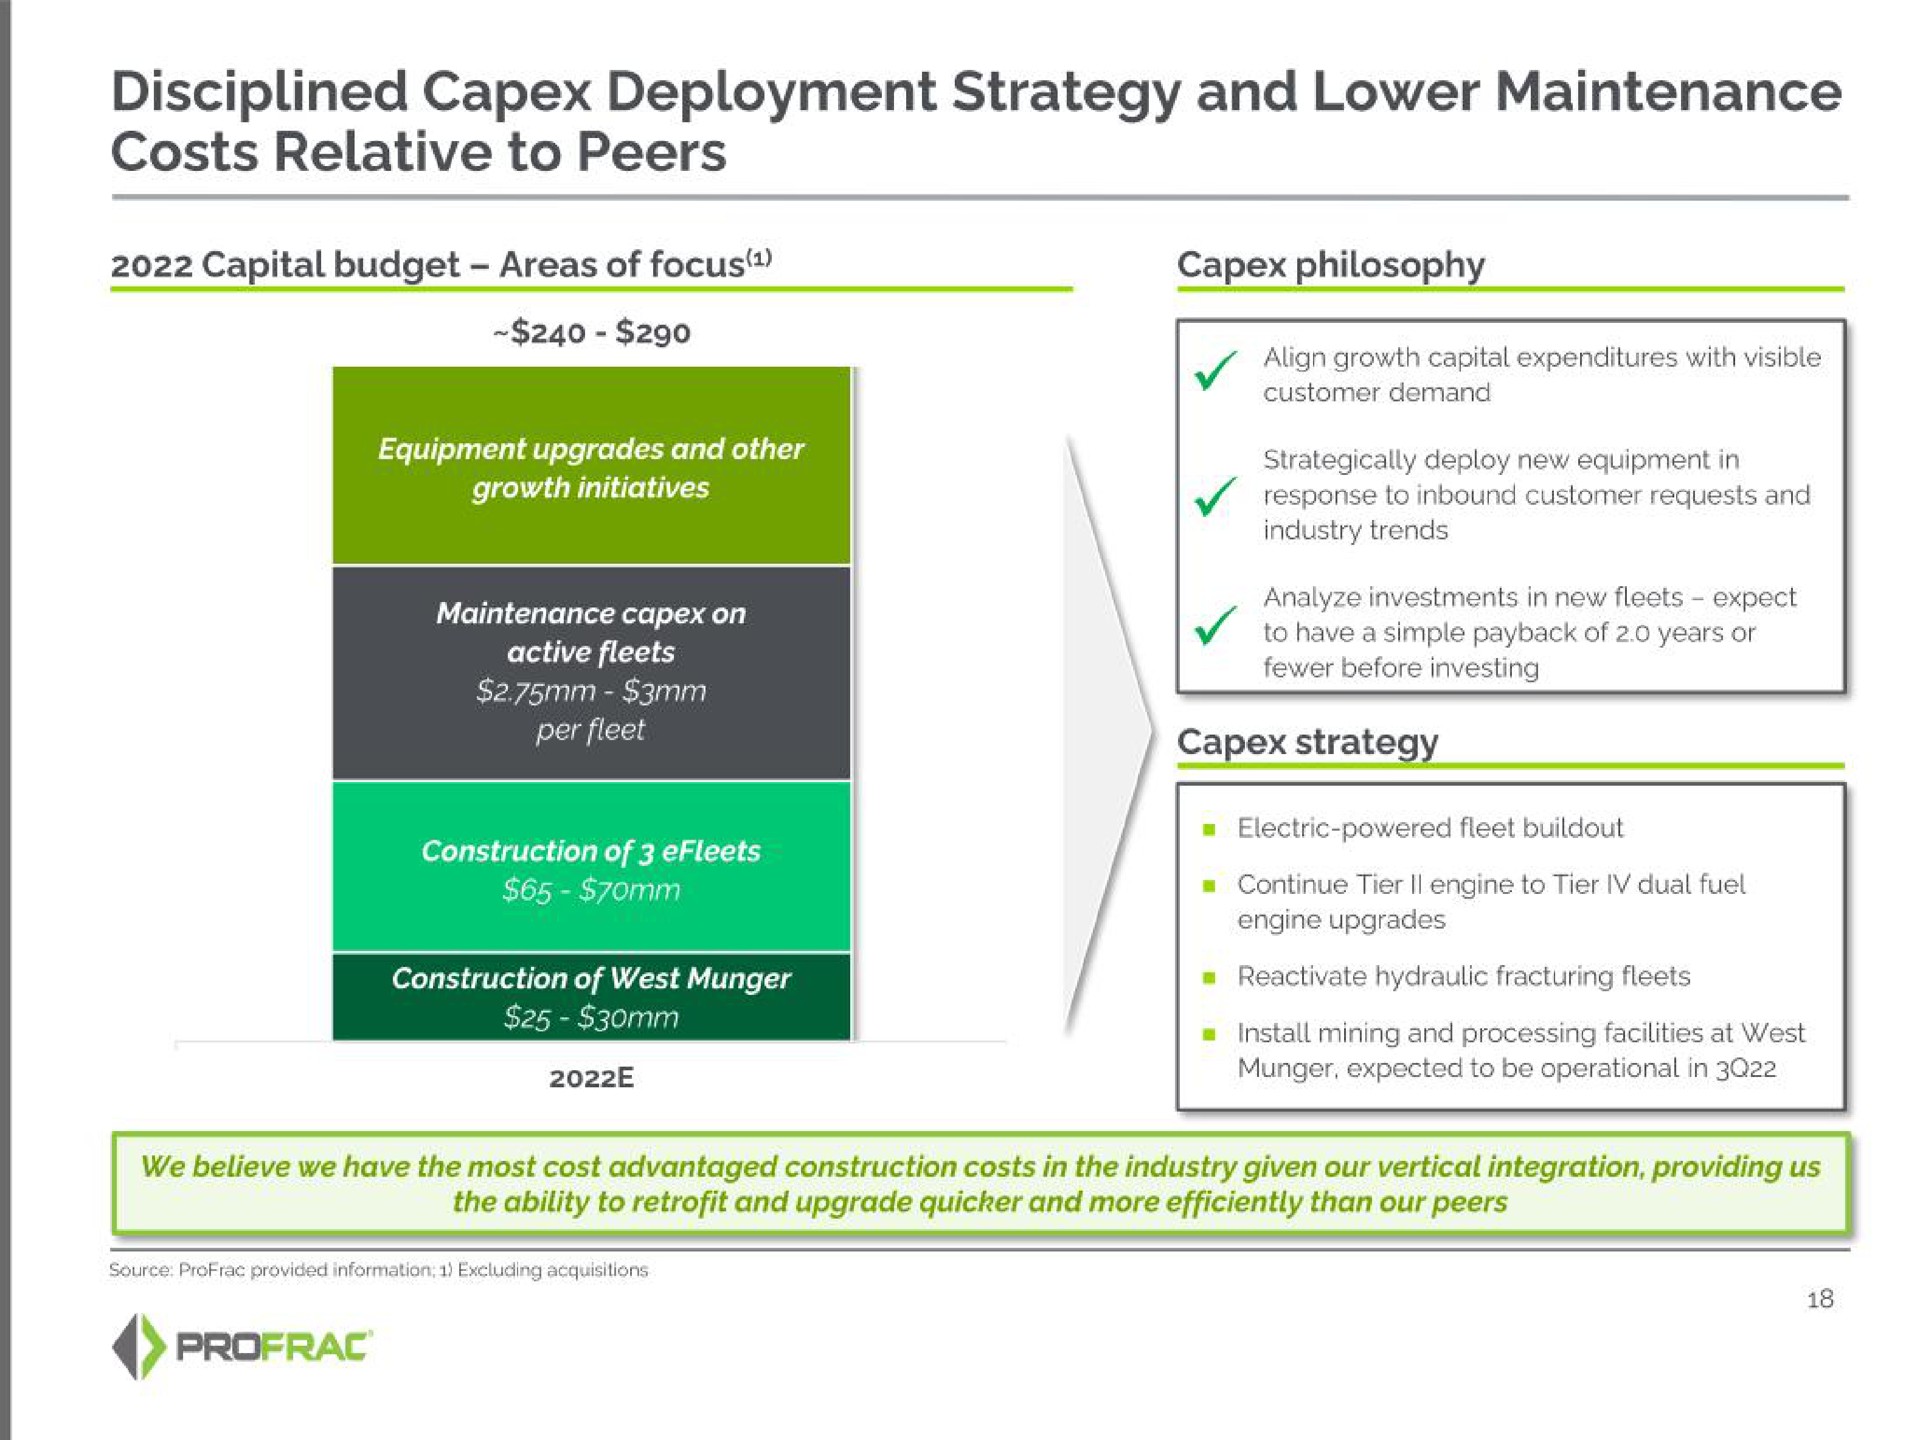 disciplined deployment strategy and lower maintenance costs relative to peers | Profrac